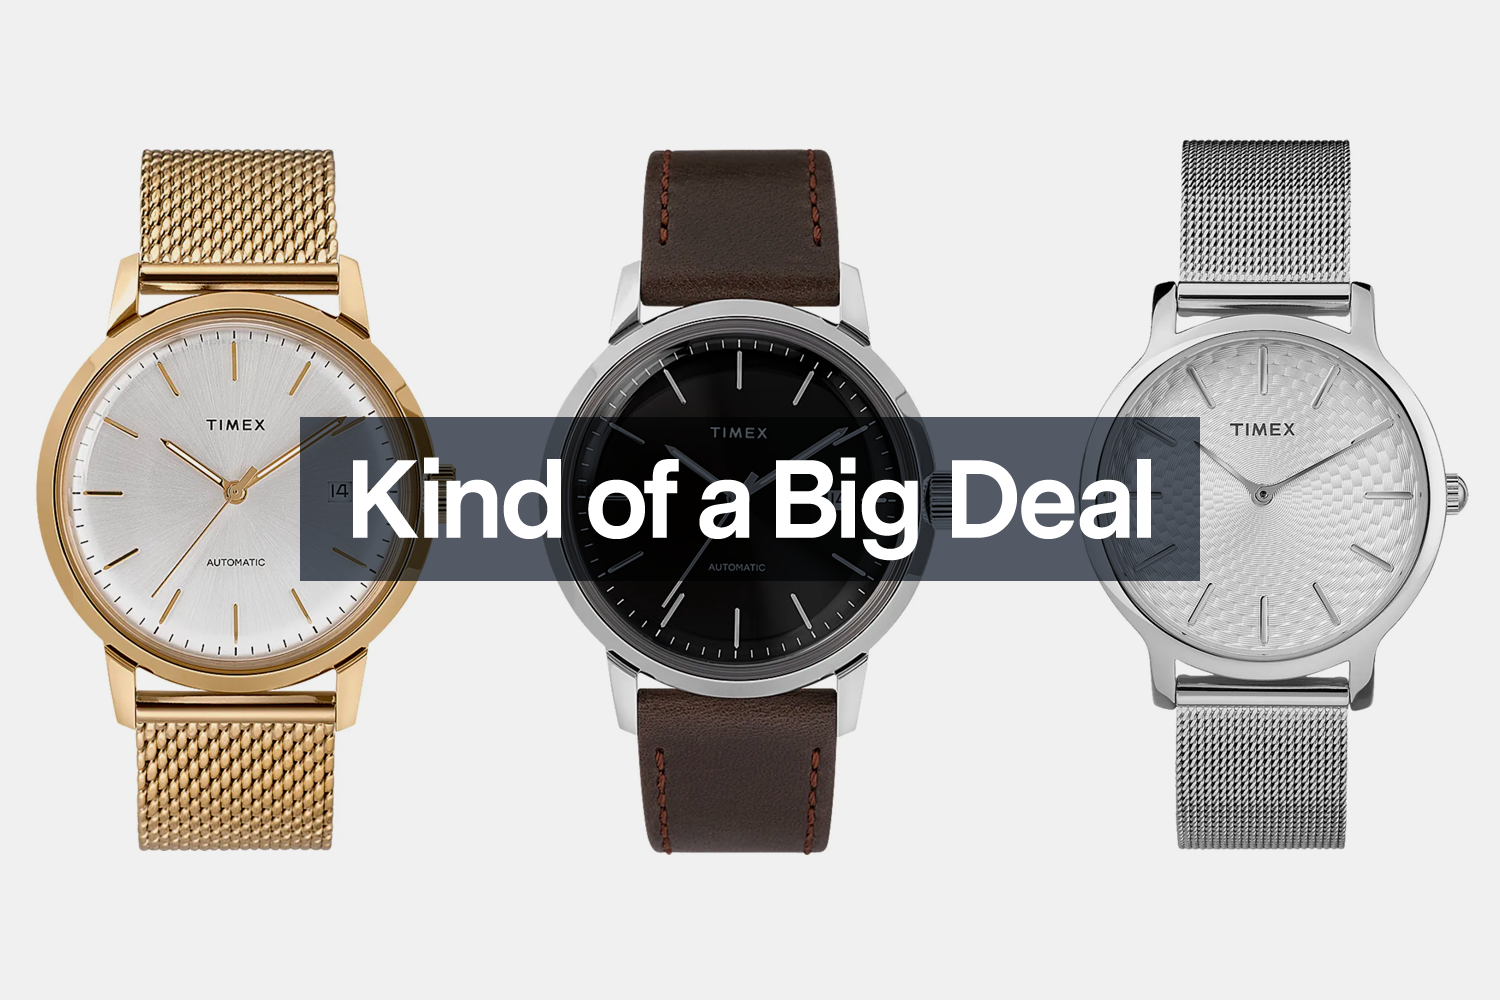 Save Up to 50% on These Timex Watches - InsideHook